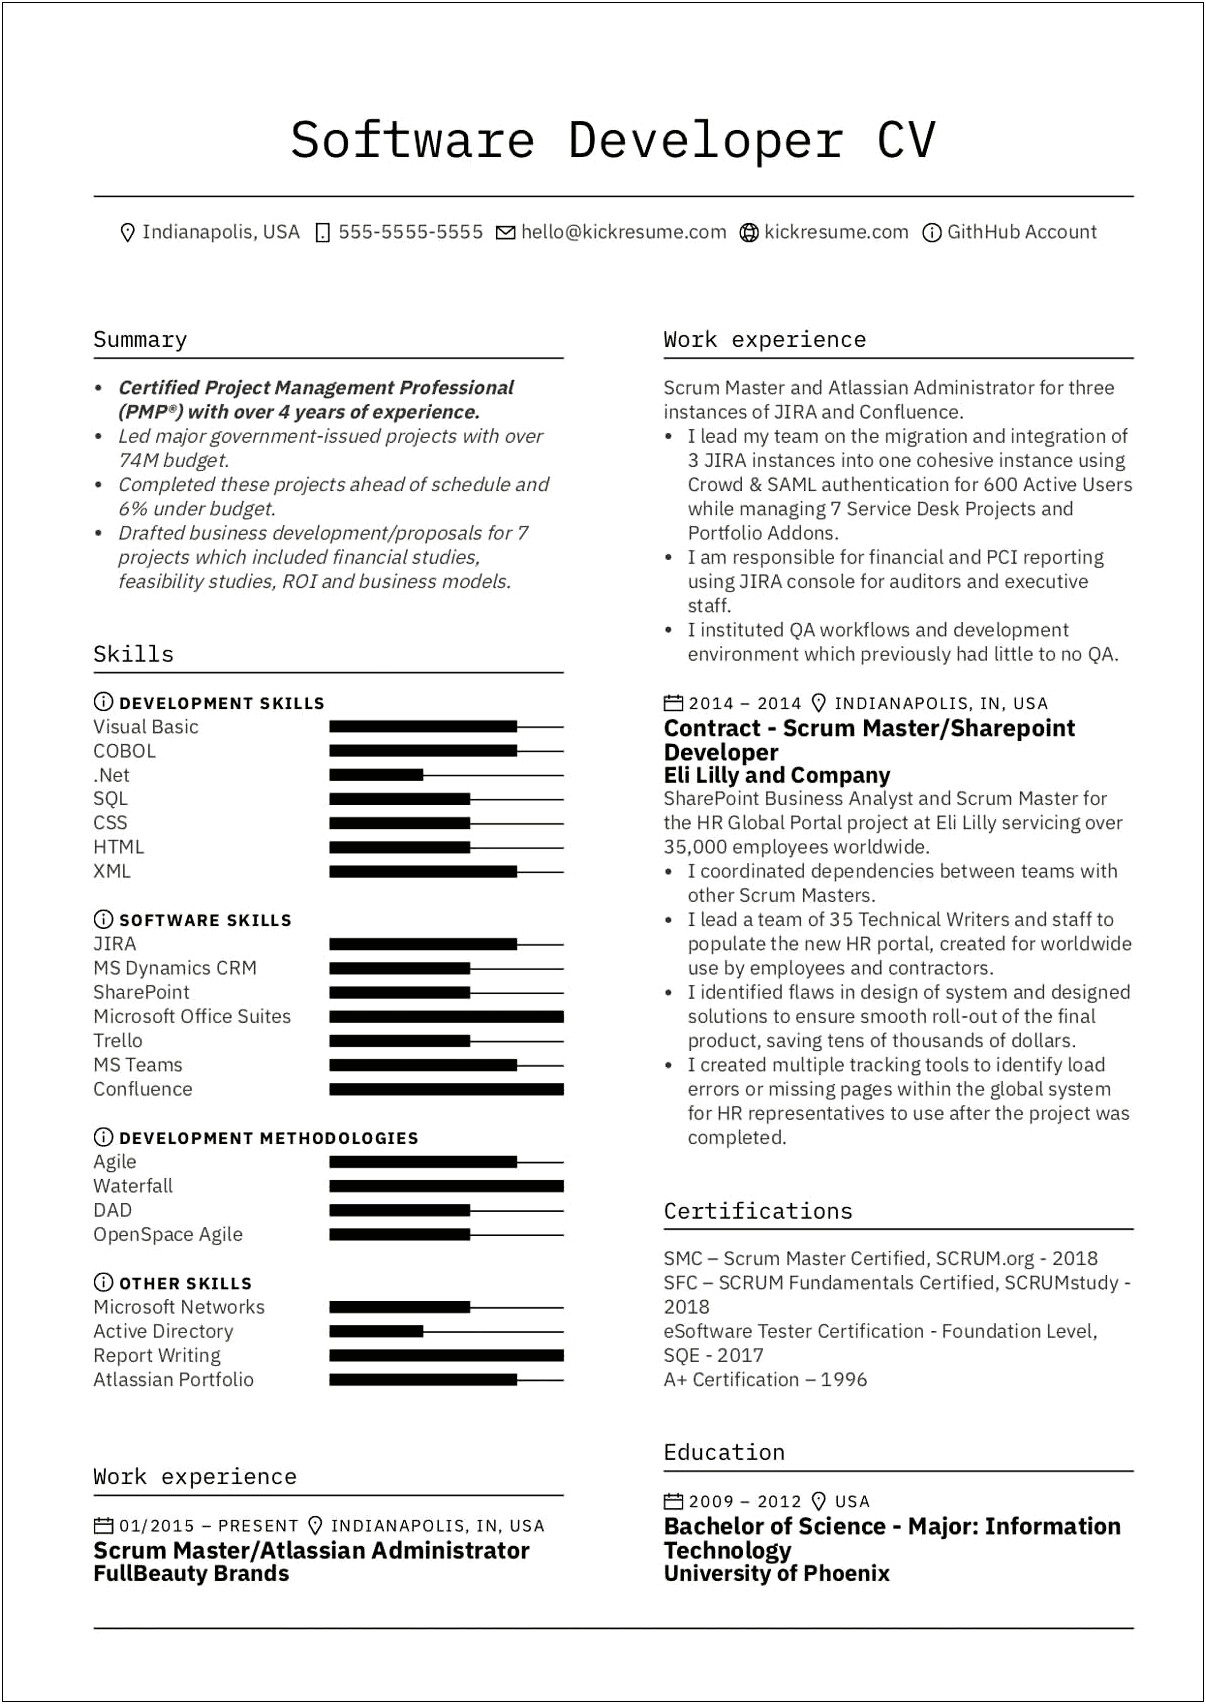 Resume Should You List Jobs In Chronological Order